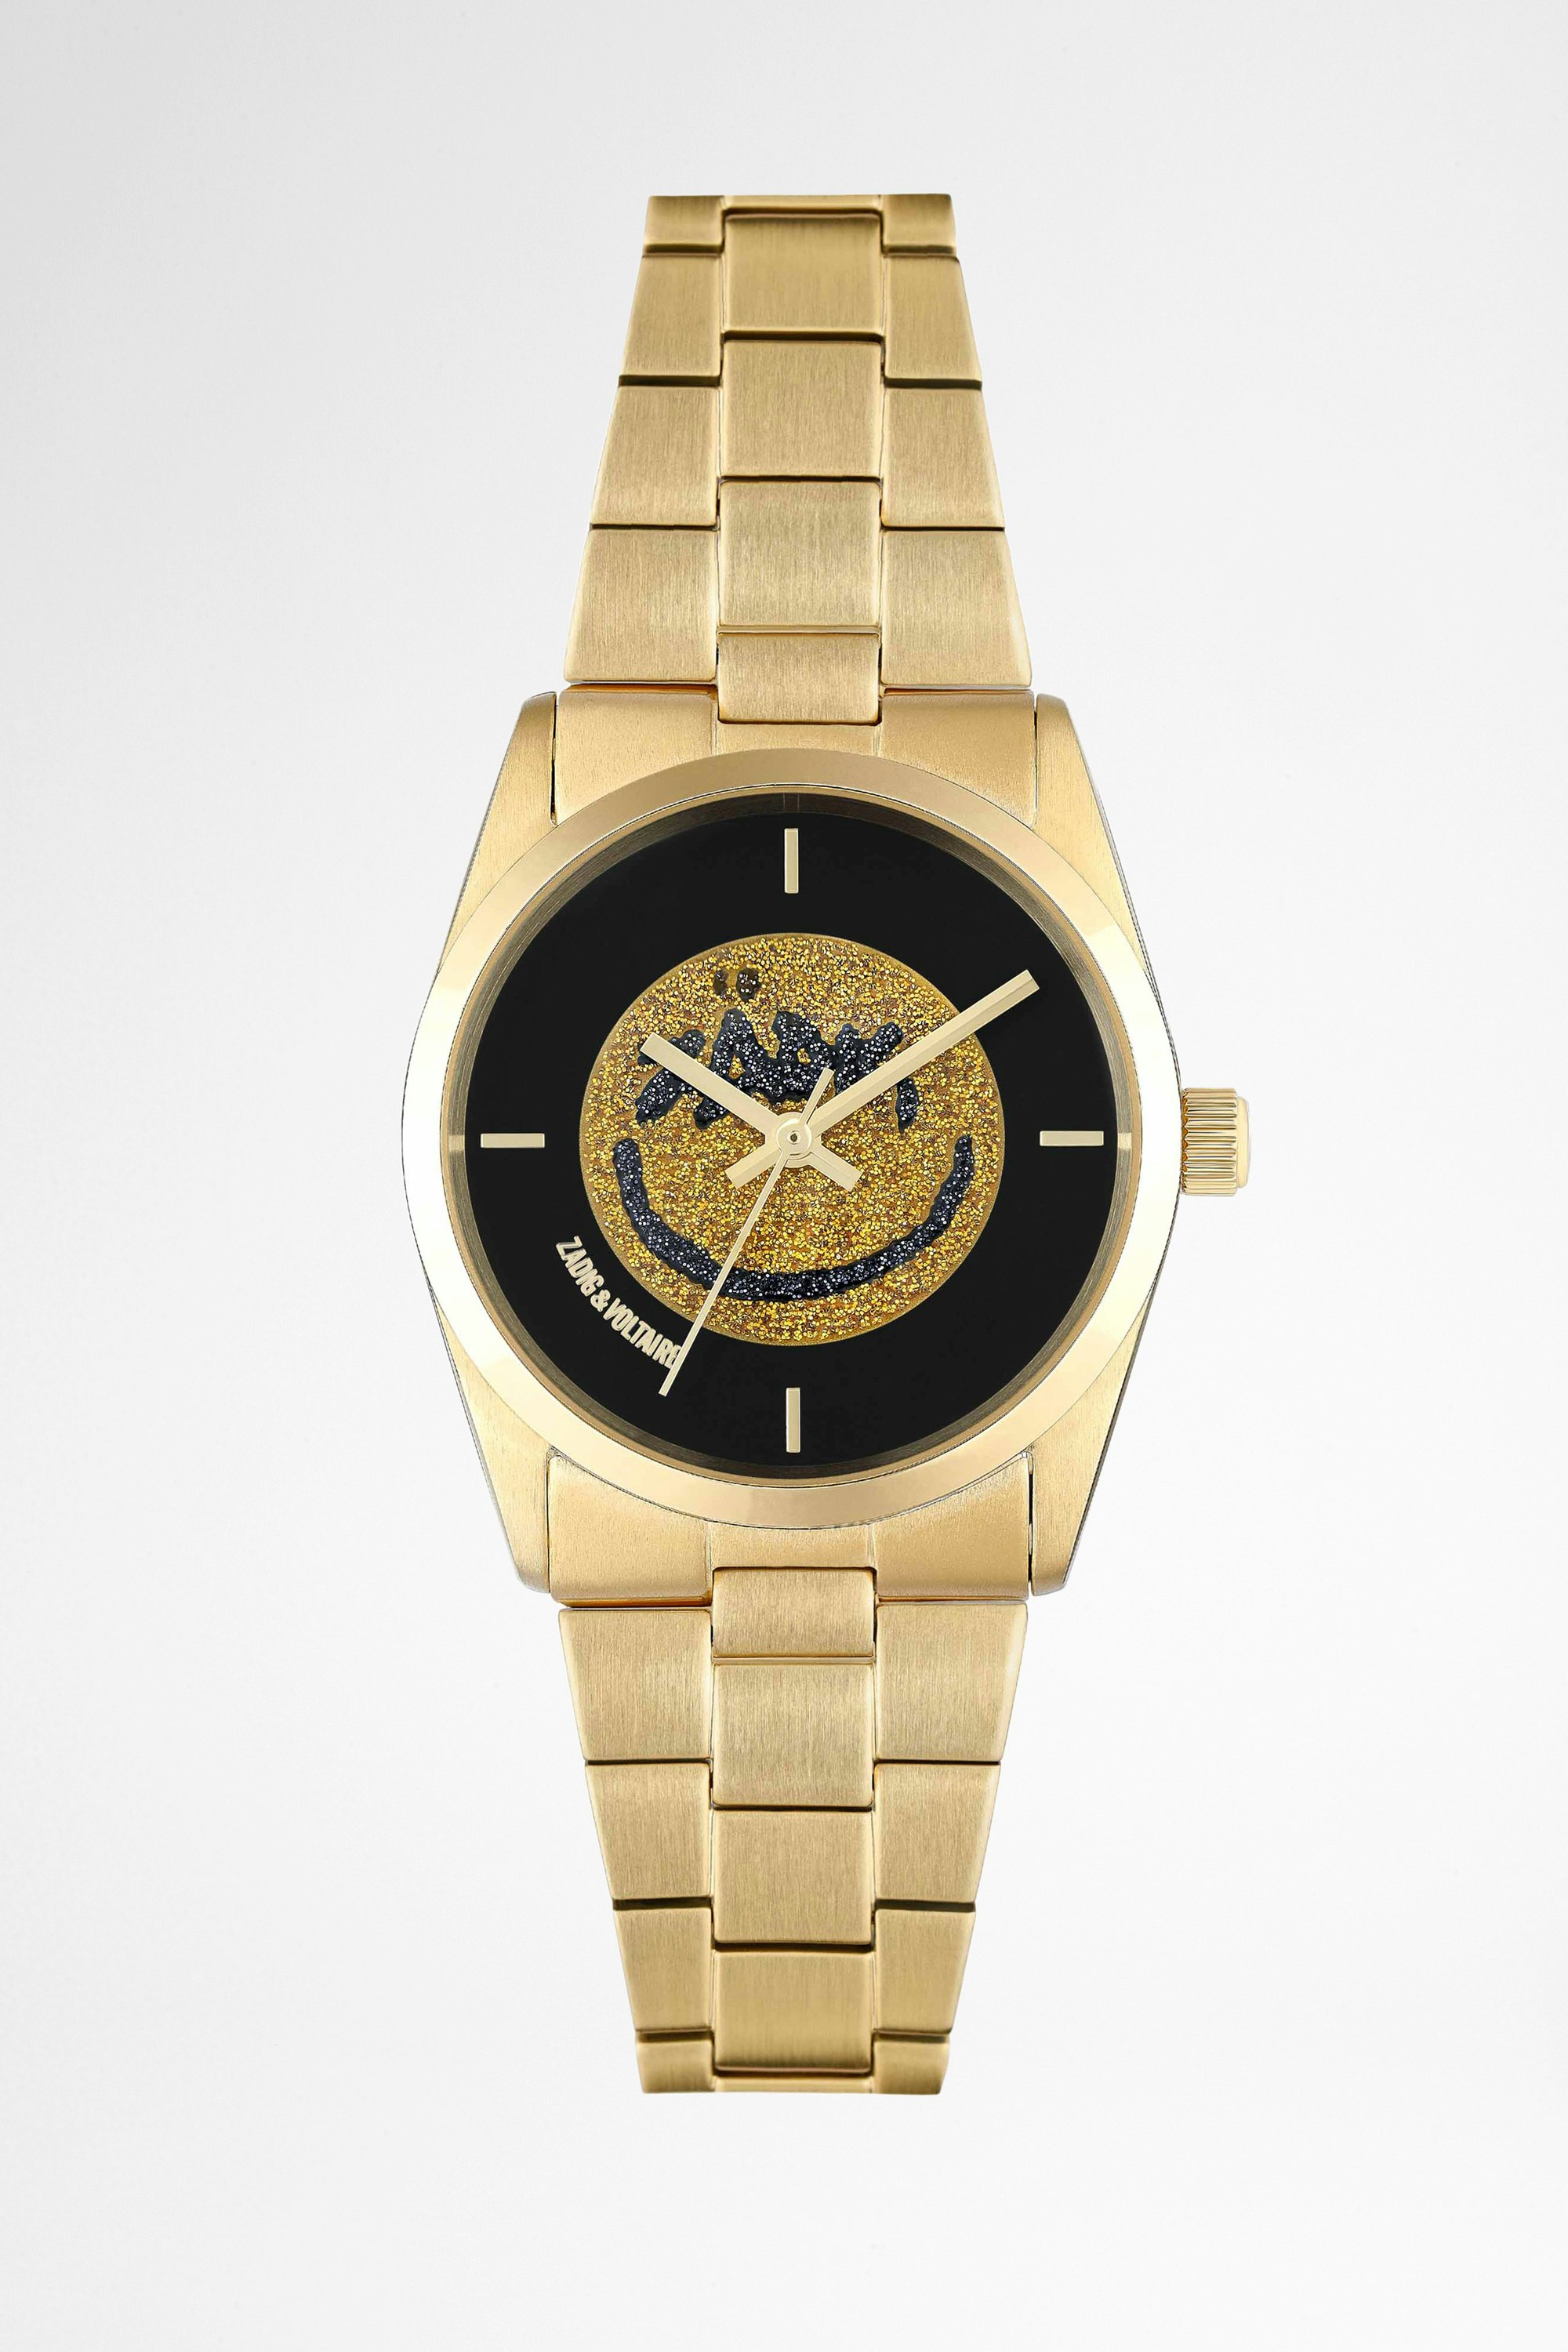 Fusion Happy Glitter Watch Women’s gold-tone steel watch featuring a black dial with happy glitter background